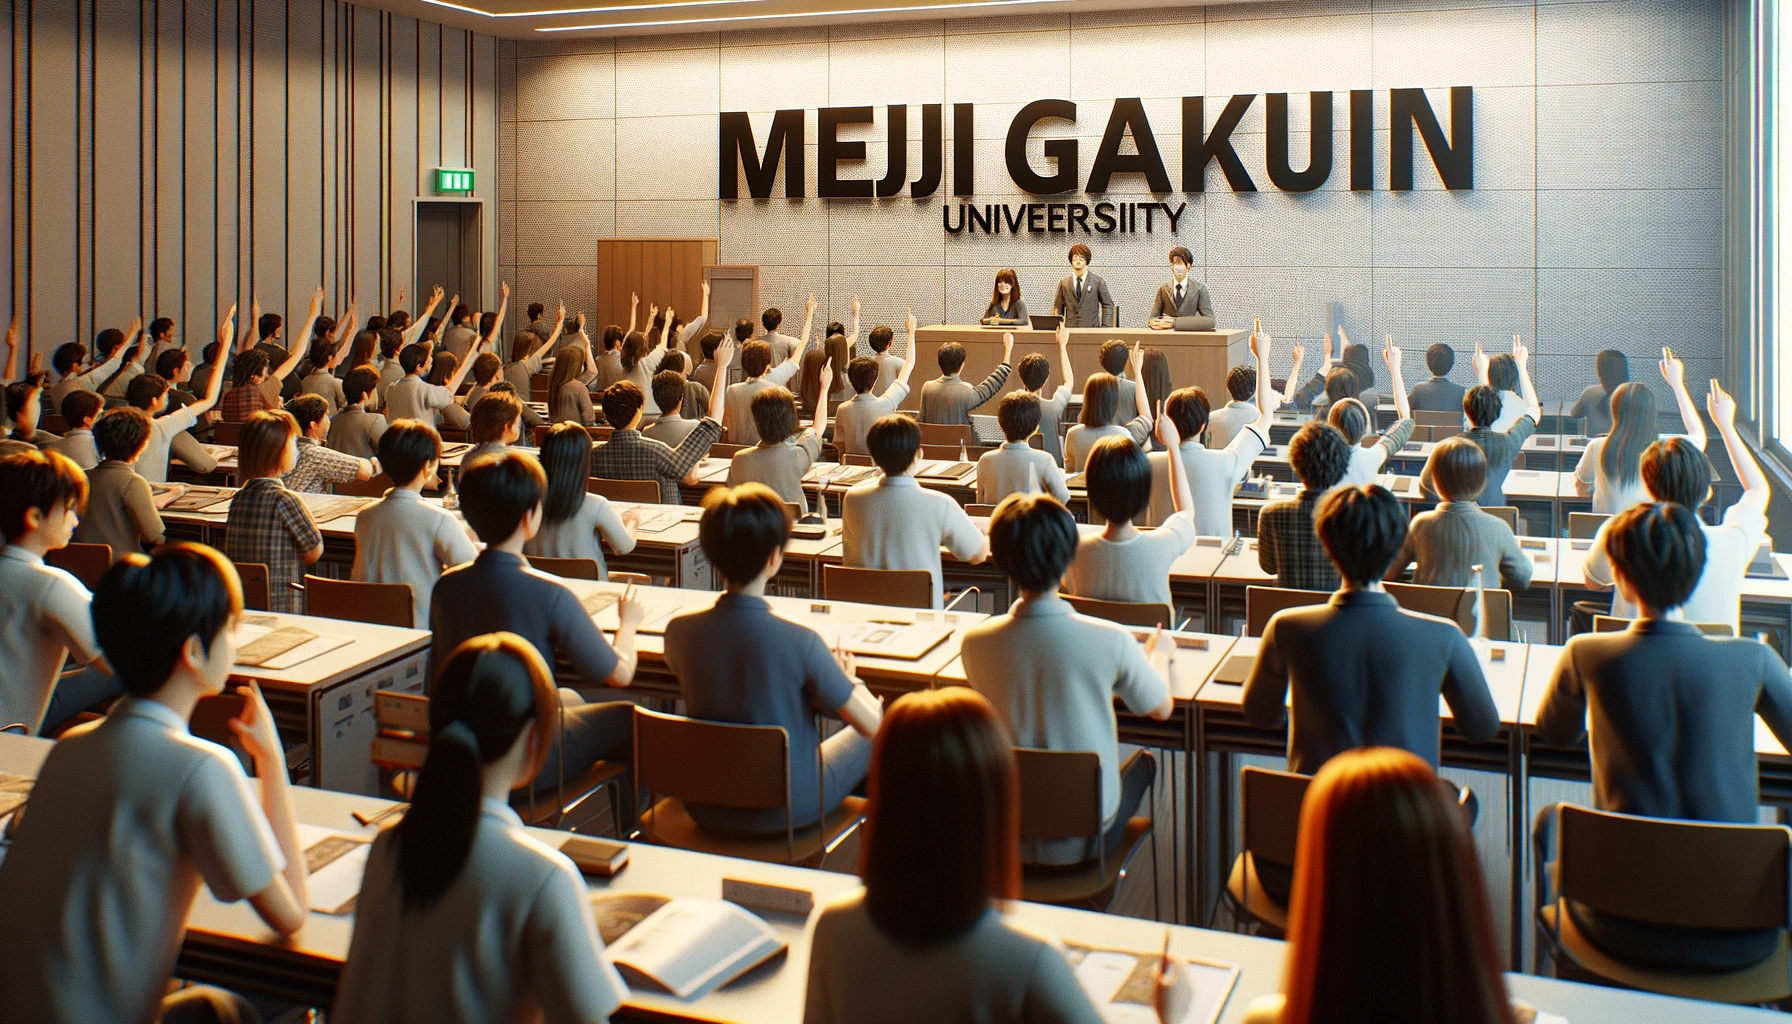 A classroom scene at Meiji Gakuin University showing students engaged in an interactive lecture. The image captures a diverse group of students attentively listening to a professor, with some raising their hands to ask questions. The classroom is equipped with modern educational technology, enhancing the learning experience. Students are taking notes and participating actively, illustrating the university's commitment to high-quality education. The word 'MEIJI GAKUIN' is prominently displayed, emphasizing the academic excellence of the university.